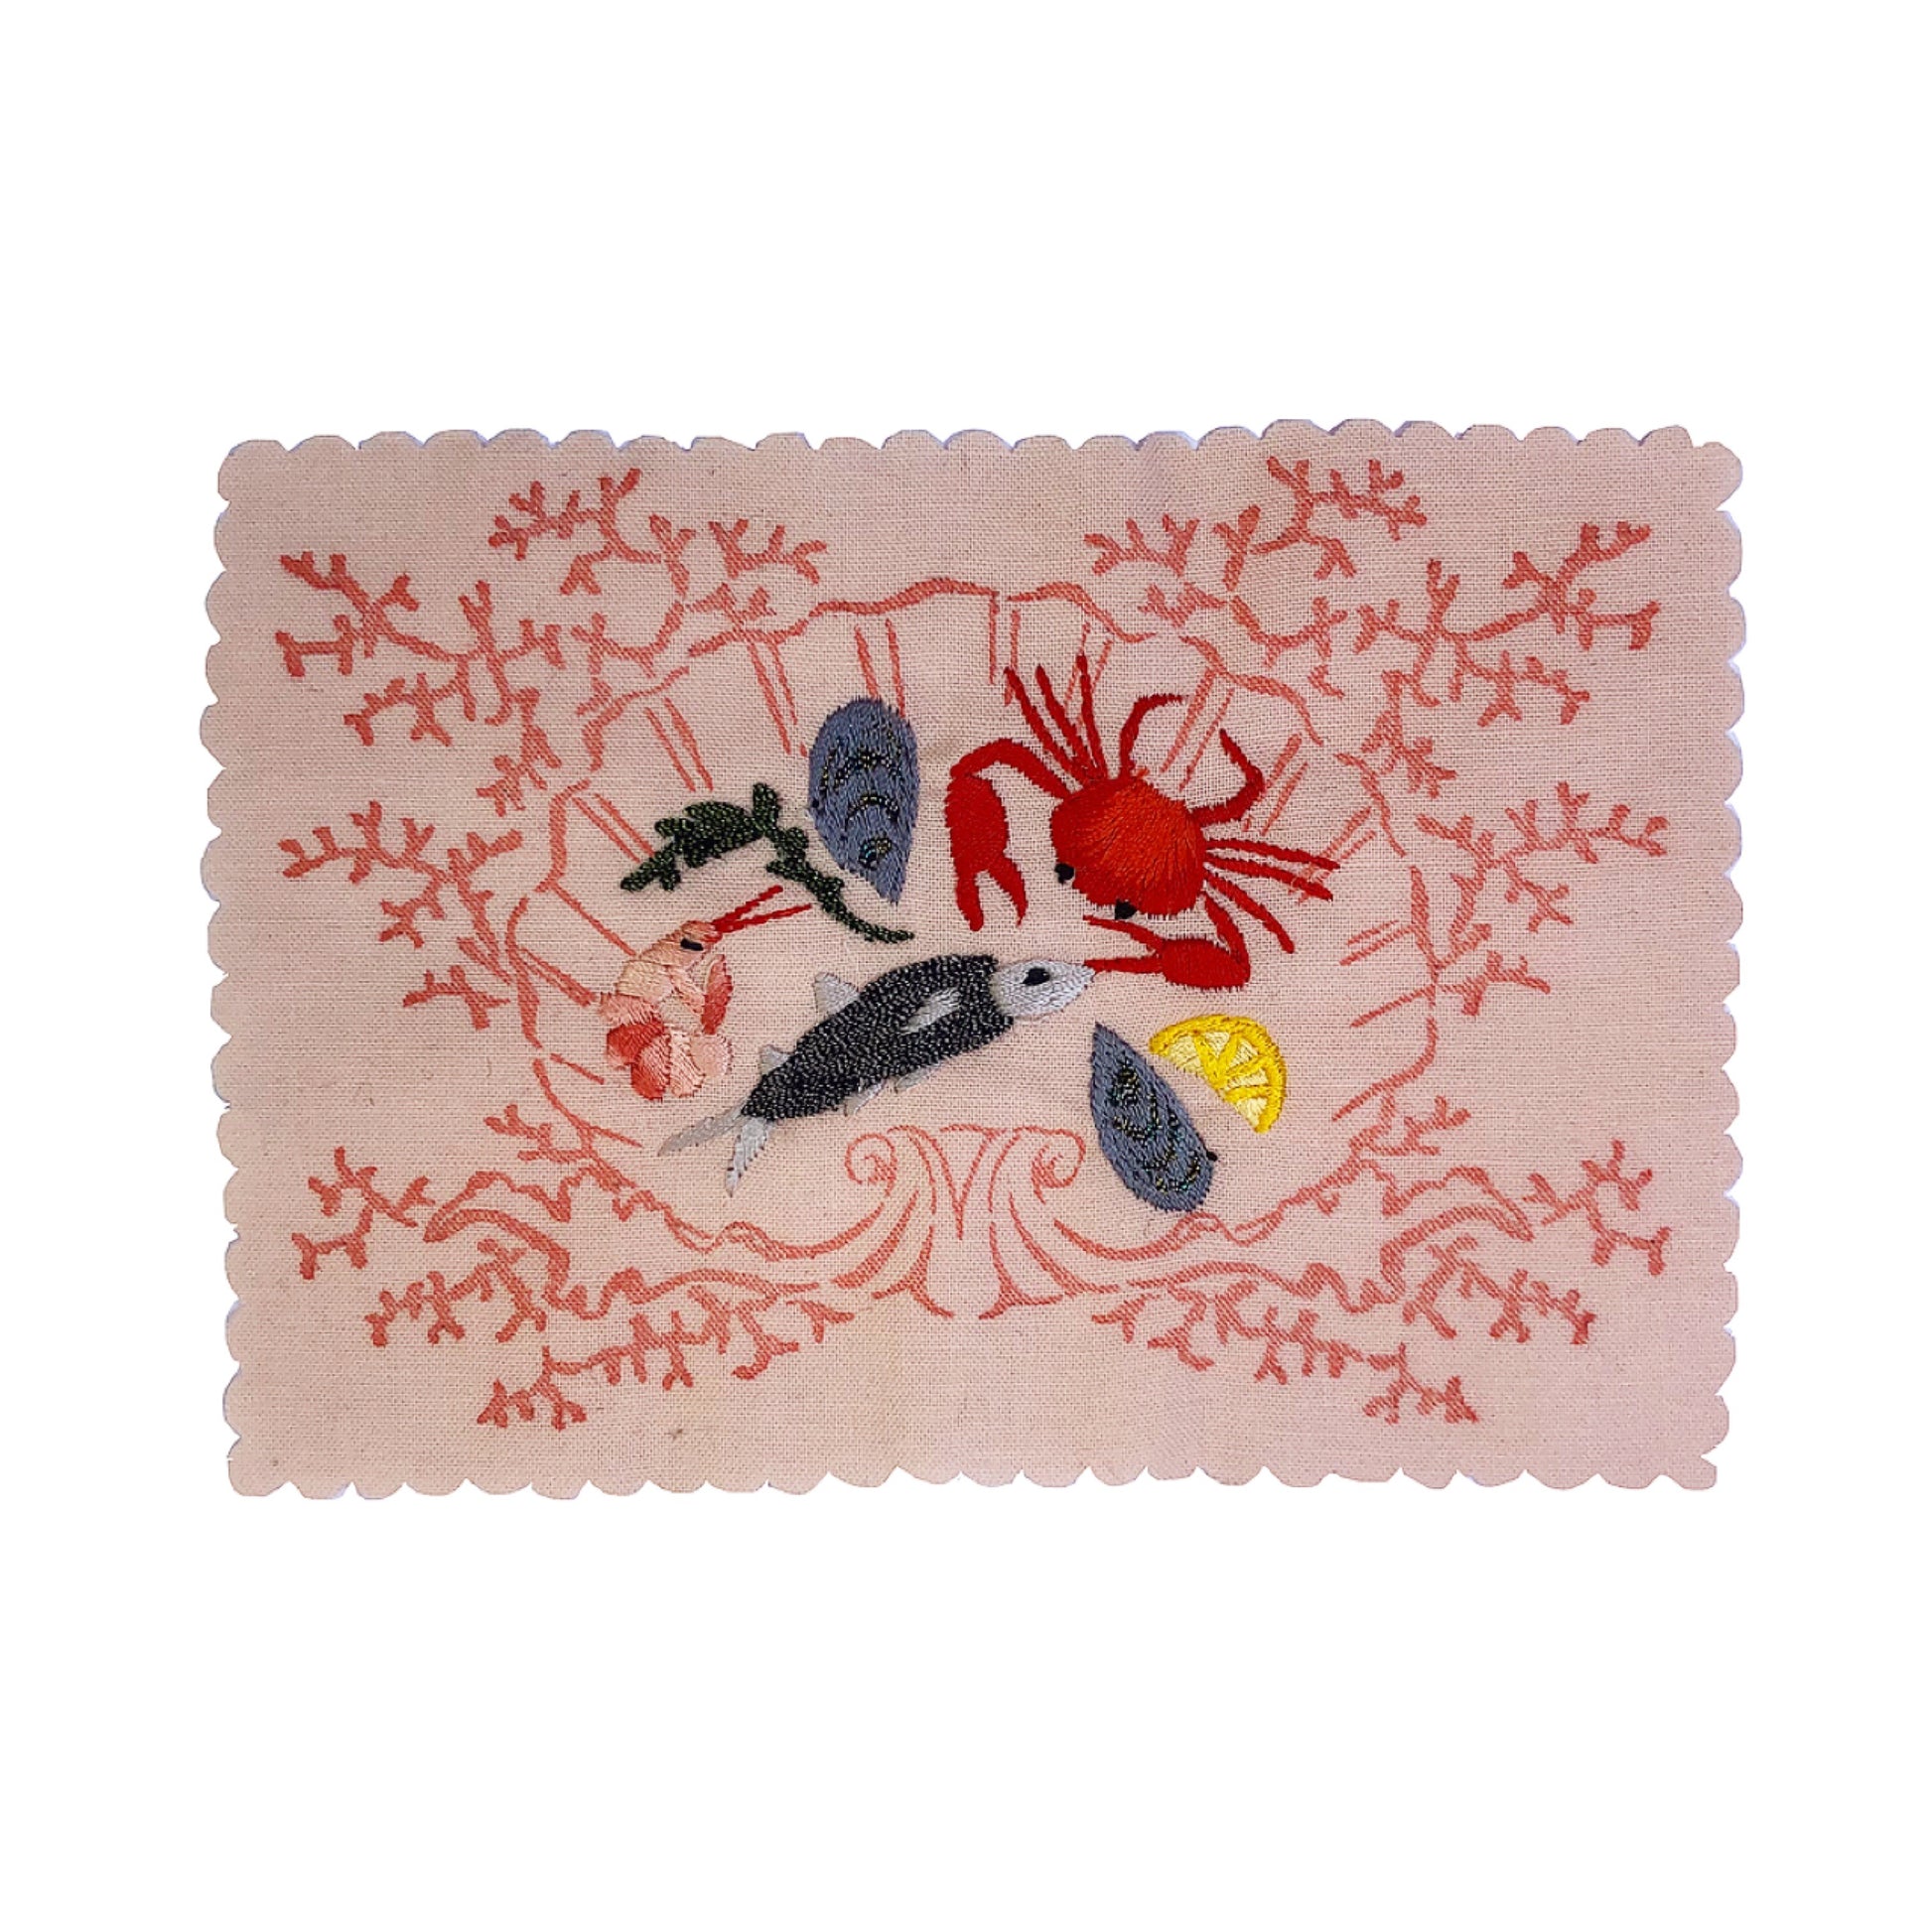 'Fruits de Mer' embroidered piece on white background